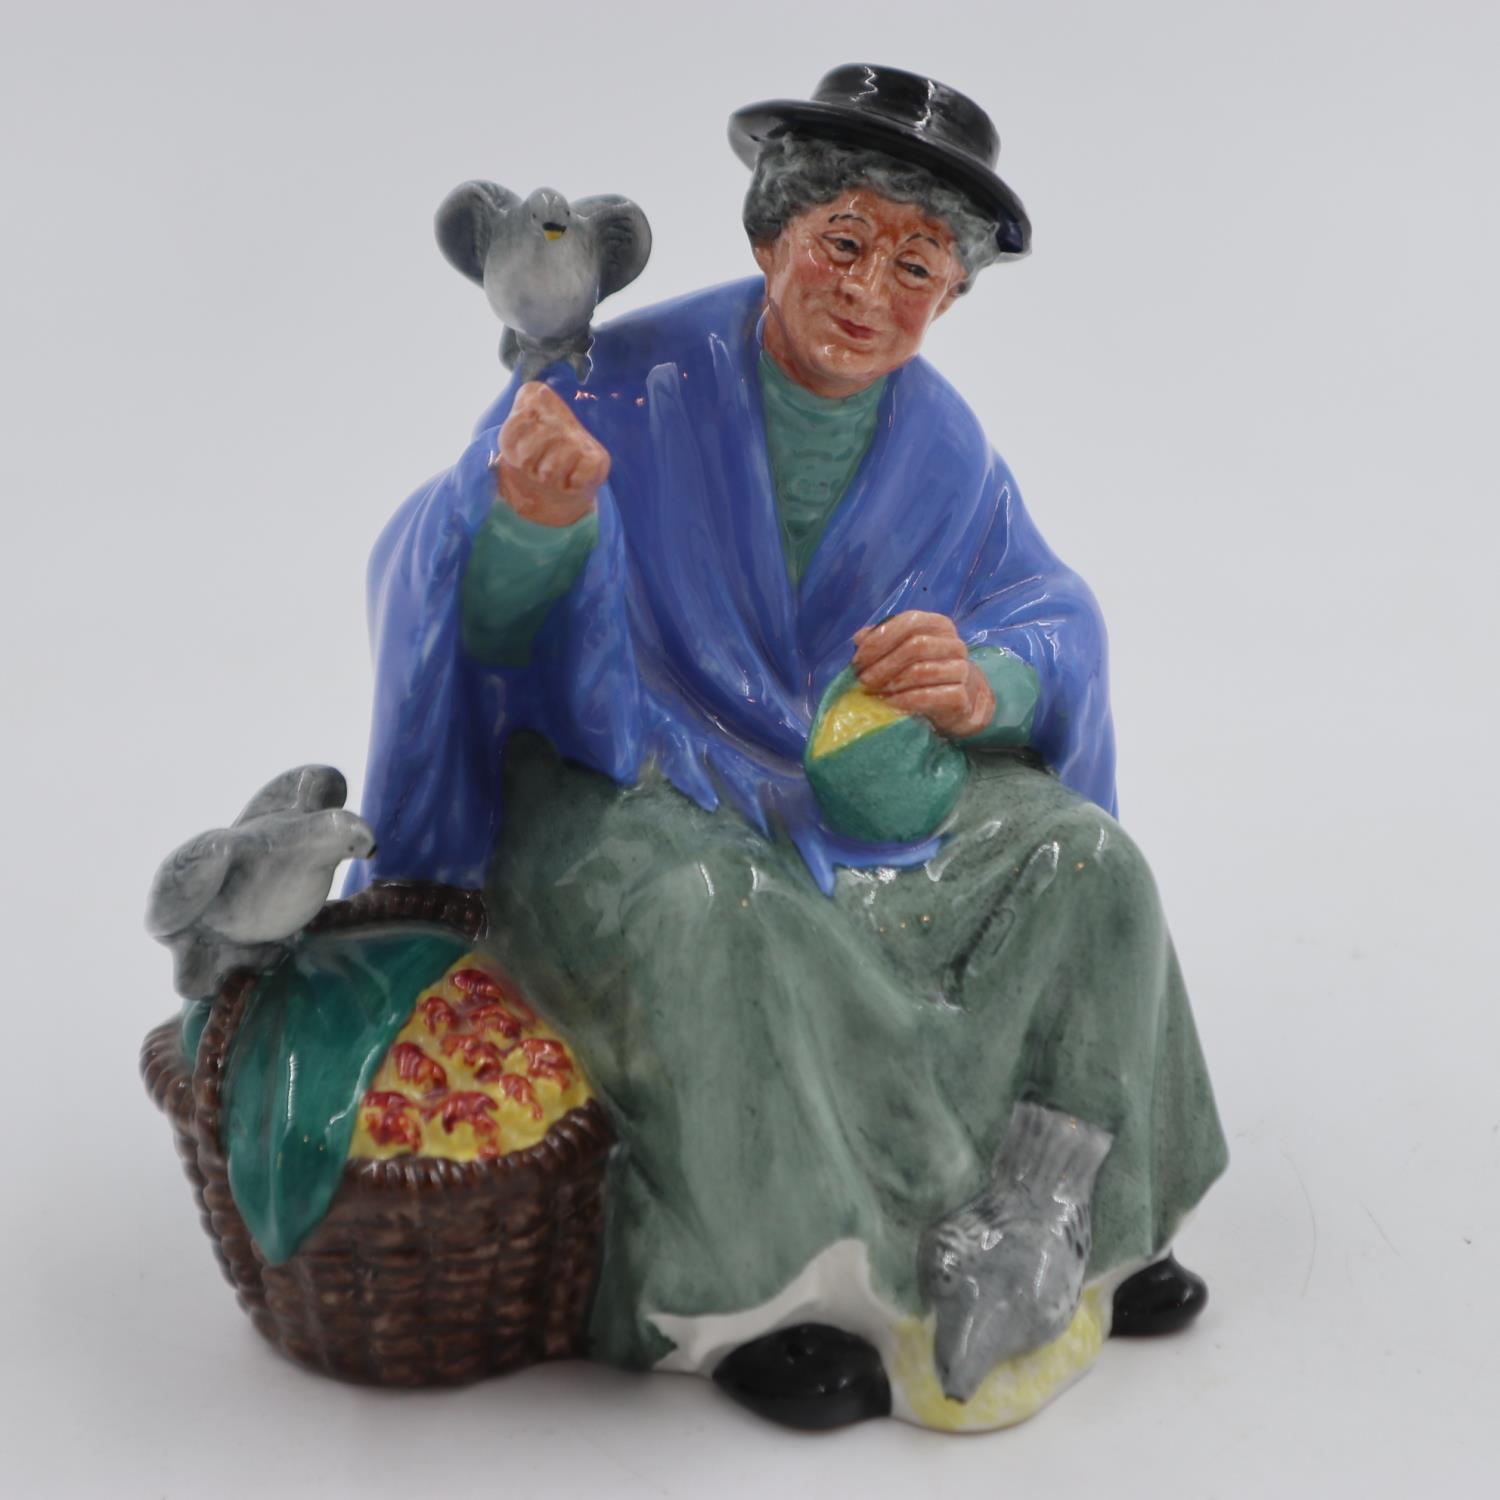 Royal Doulton character figurine, Tuppence A Bag, H: 13 cm. UK P&P Group 1 (£16+VAT for the first